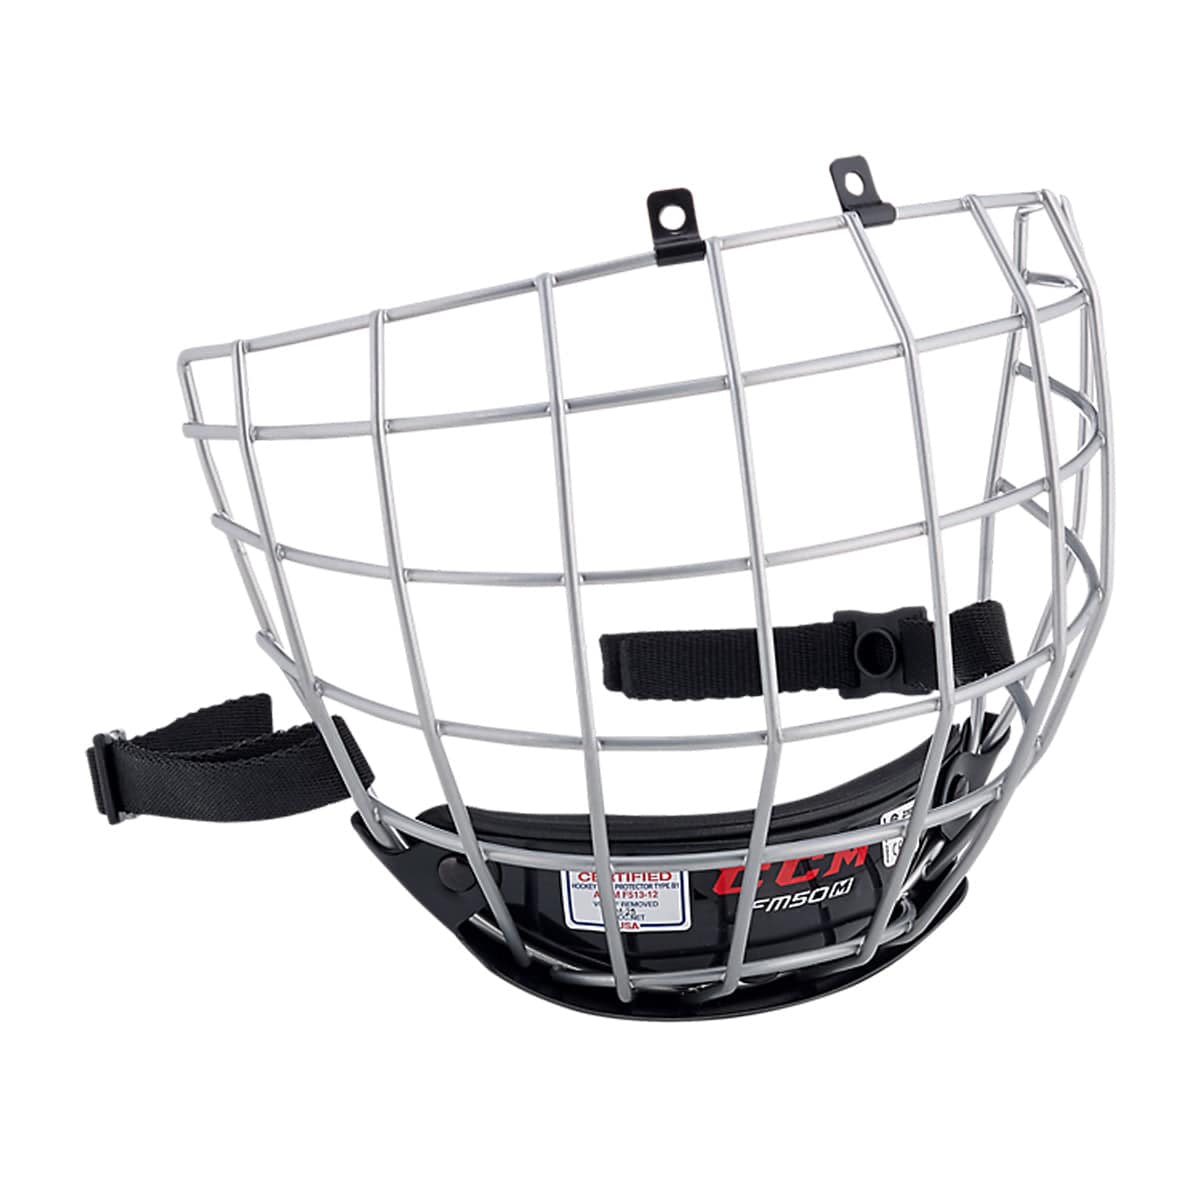 CCM FM50 Hockey Cage - The Hockey Shop Source For Sports